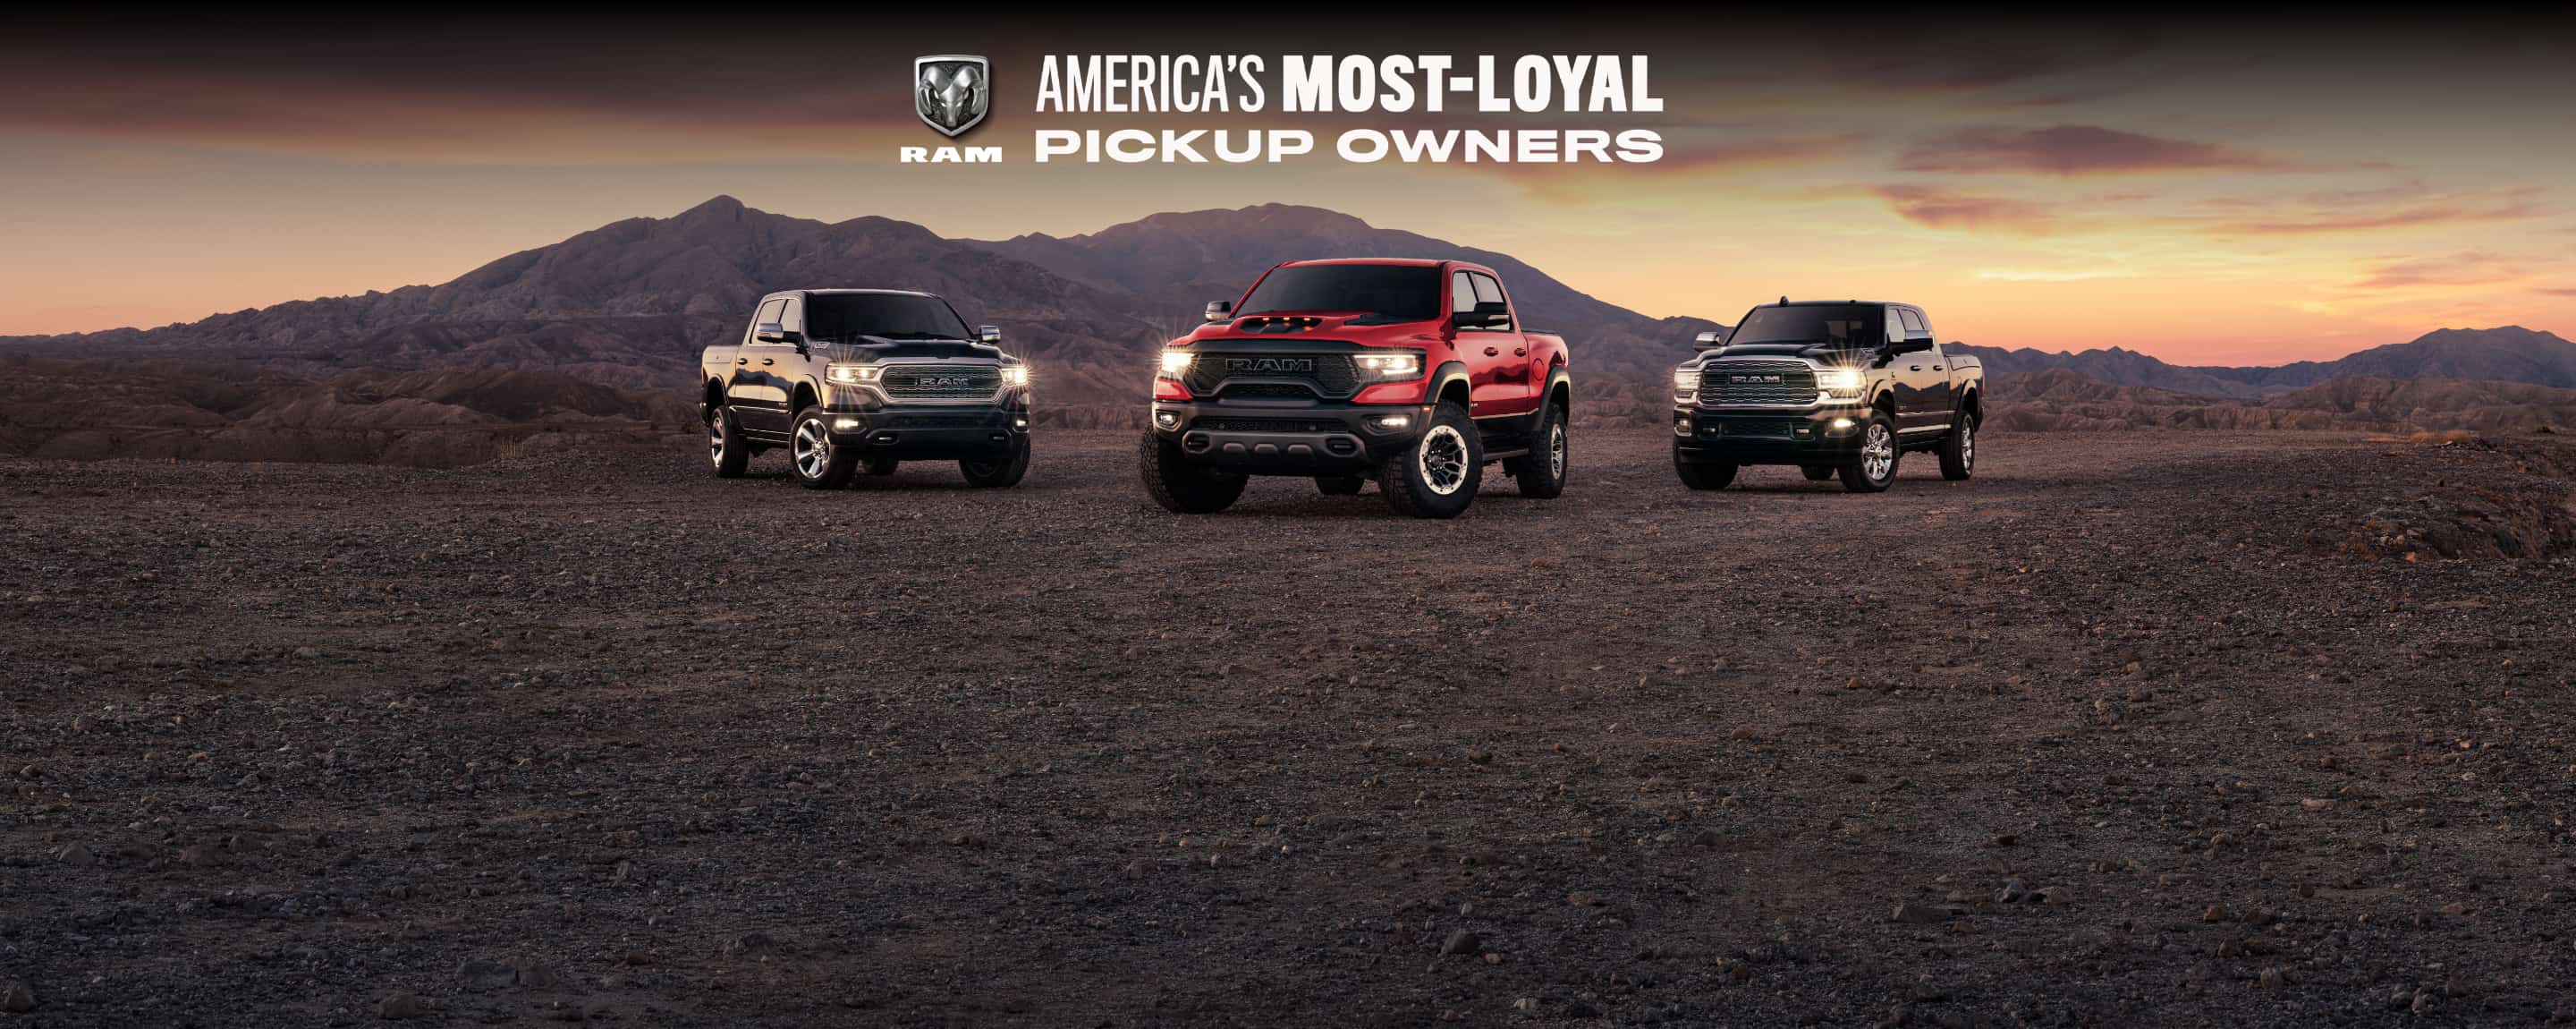 Three 2021 Ram trucks parked on a mountain trail—a Ram 1500 Limited, Ram 1500 TRX and Ram 2500 Limited. Ram, America's Most Loyal Pickup Owners logo.